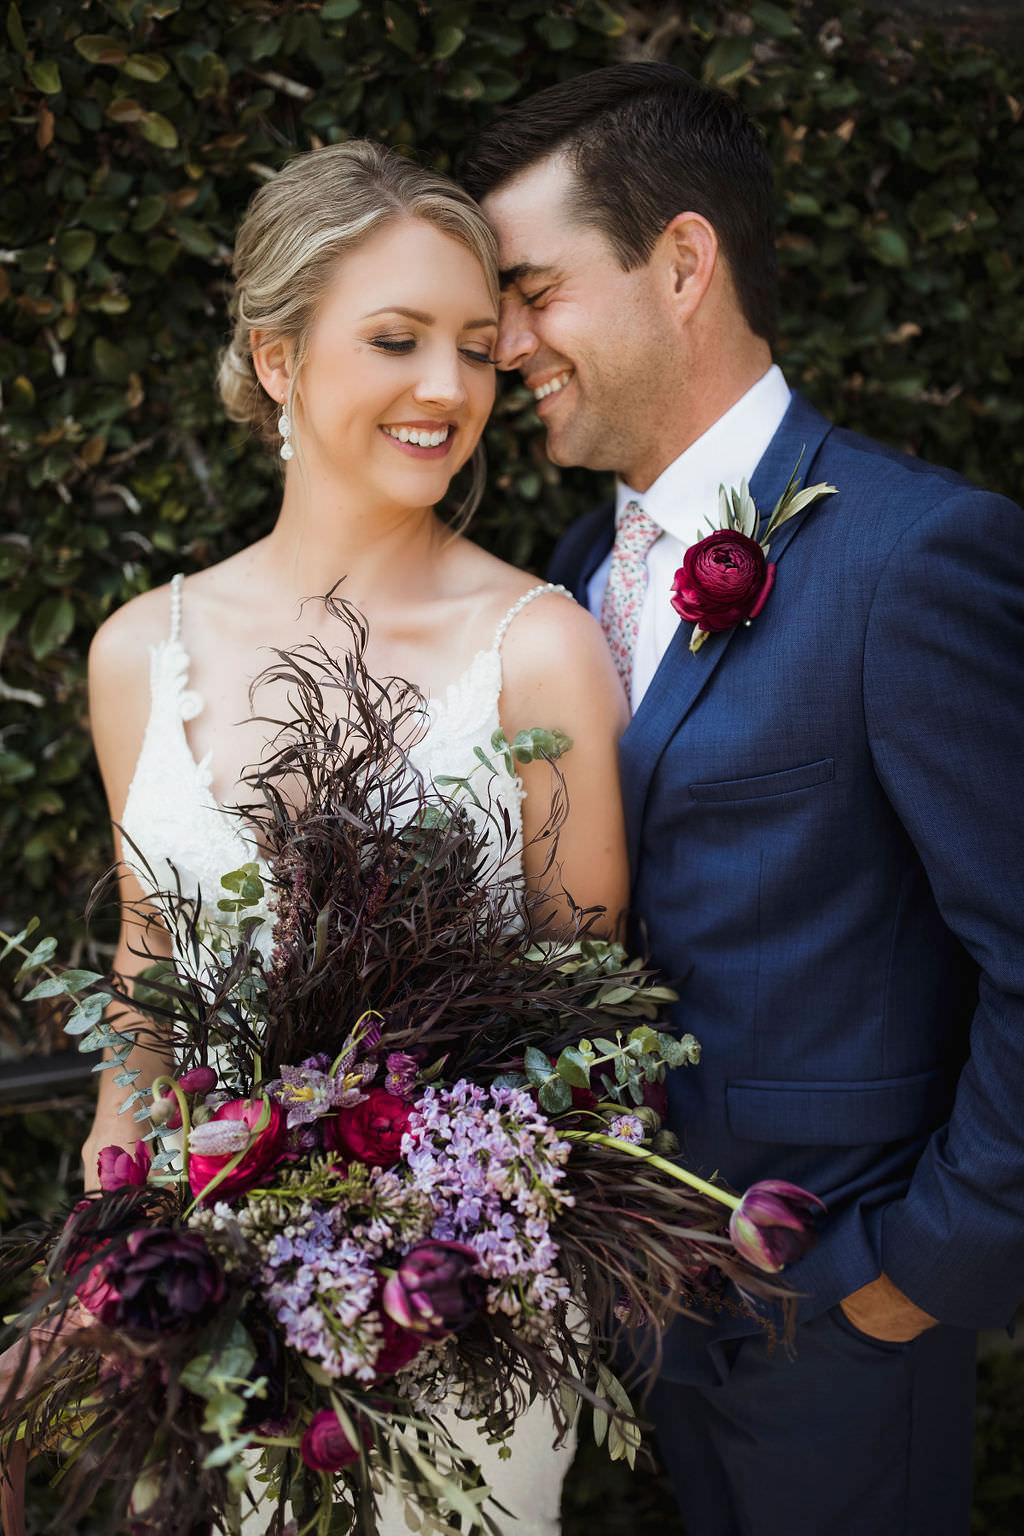 Tampa Bay Bride and Groom First Look Wedding Portrait, Bride Holding Unique Purple, Lilac, Plum and Greenery Floral Bridal Bouquet, Groom in Navy Blue Suit with Deep Dark Red Boutonniere